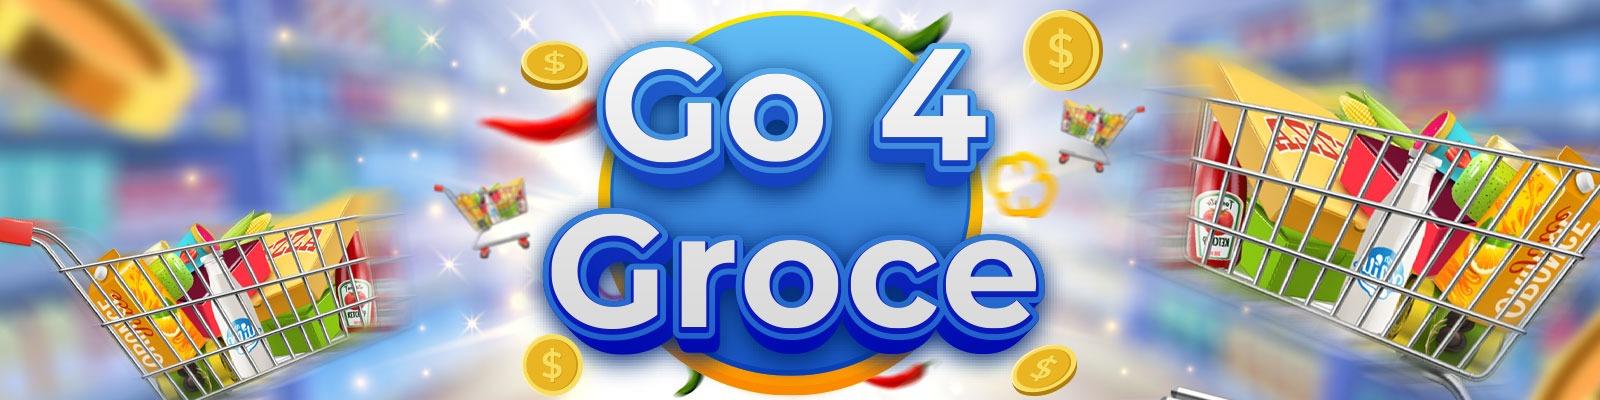 Go 4 Groce